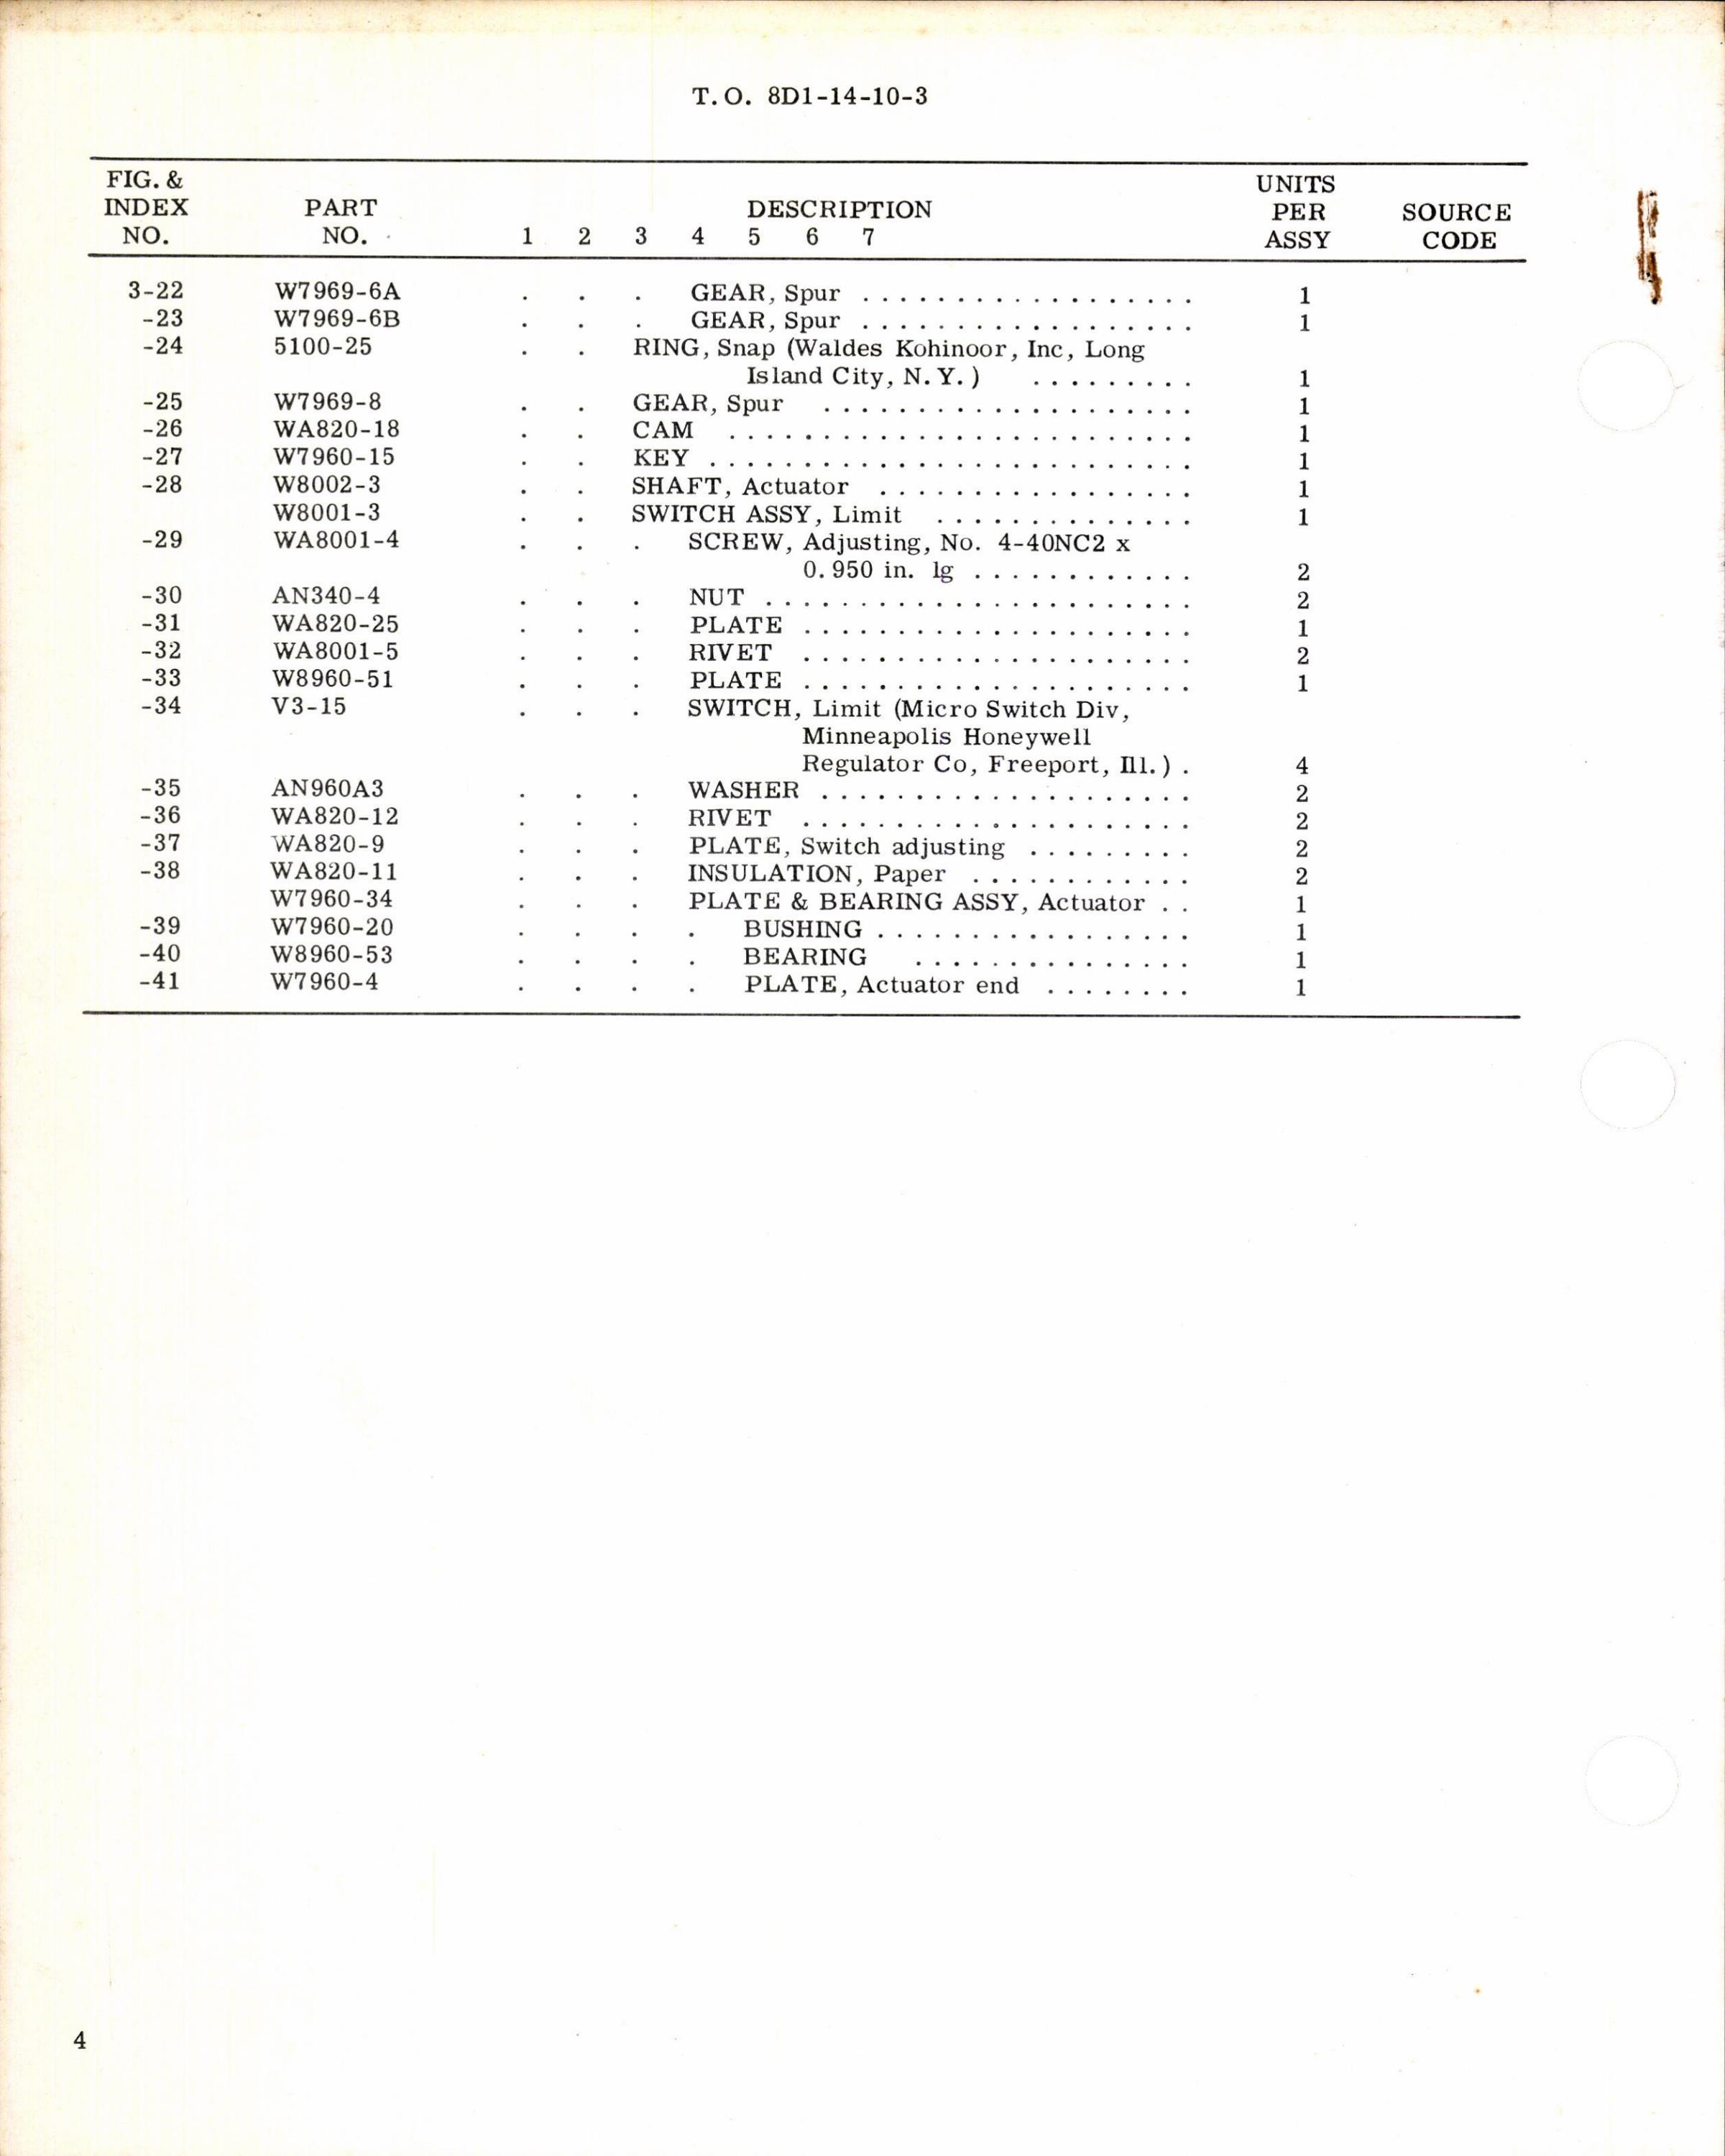 Sample page 4 from AirCorps Library document: Parts Breakdown for Actuator Assembly Part No 104271